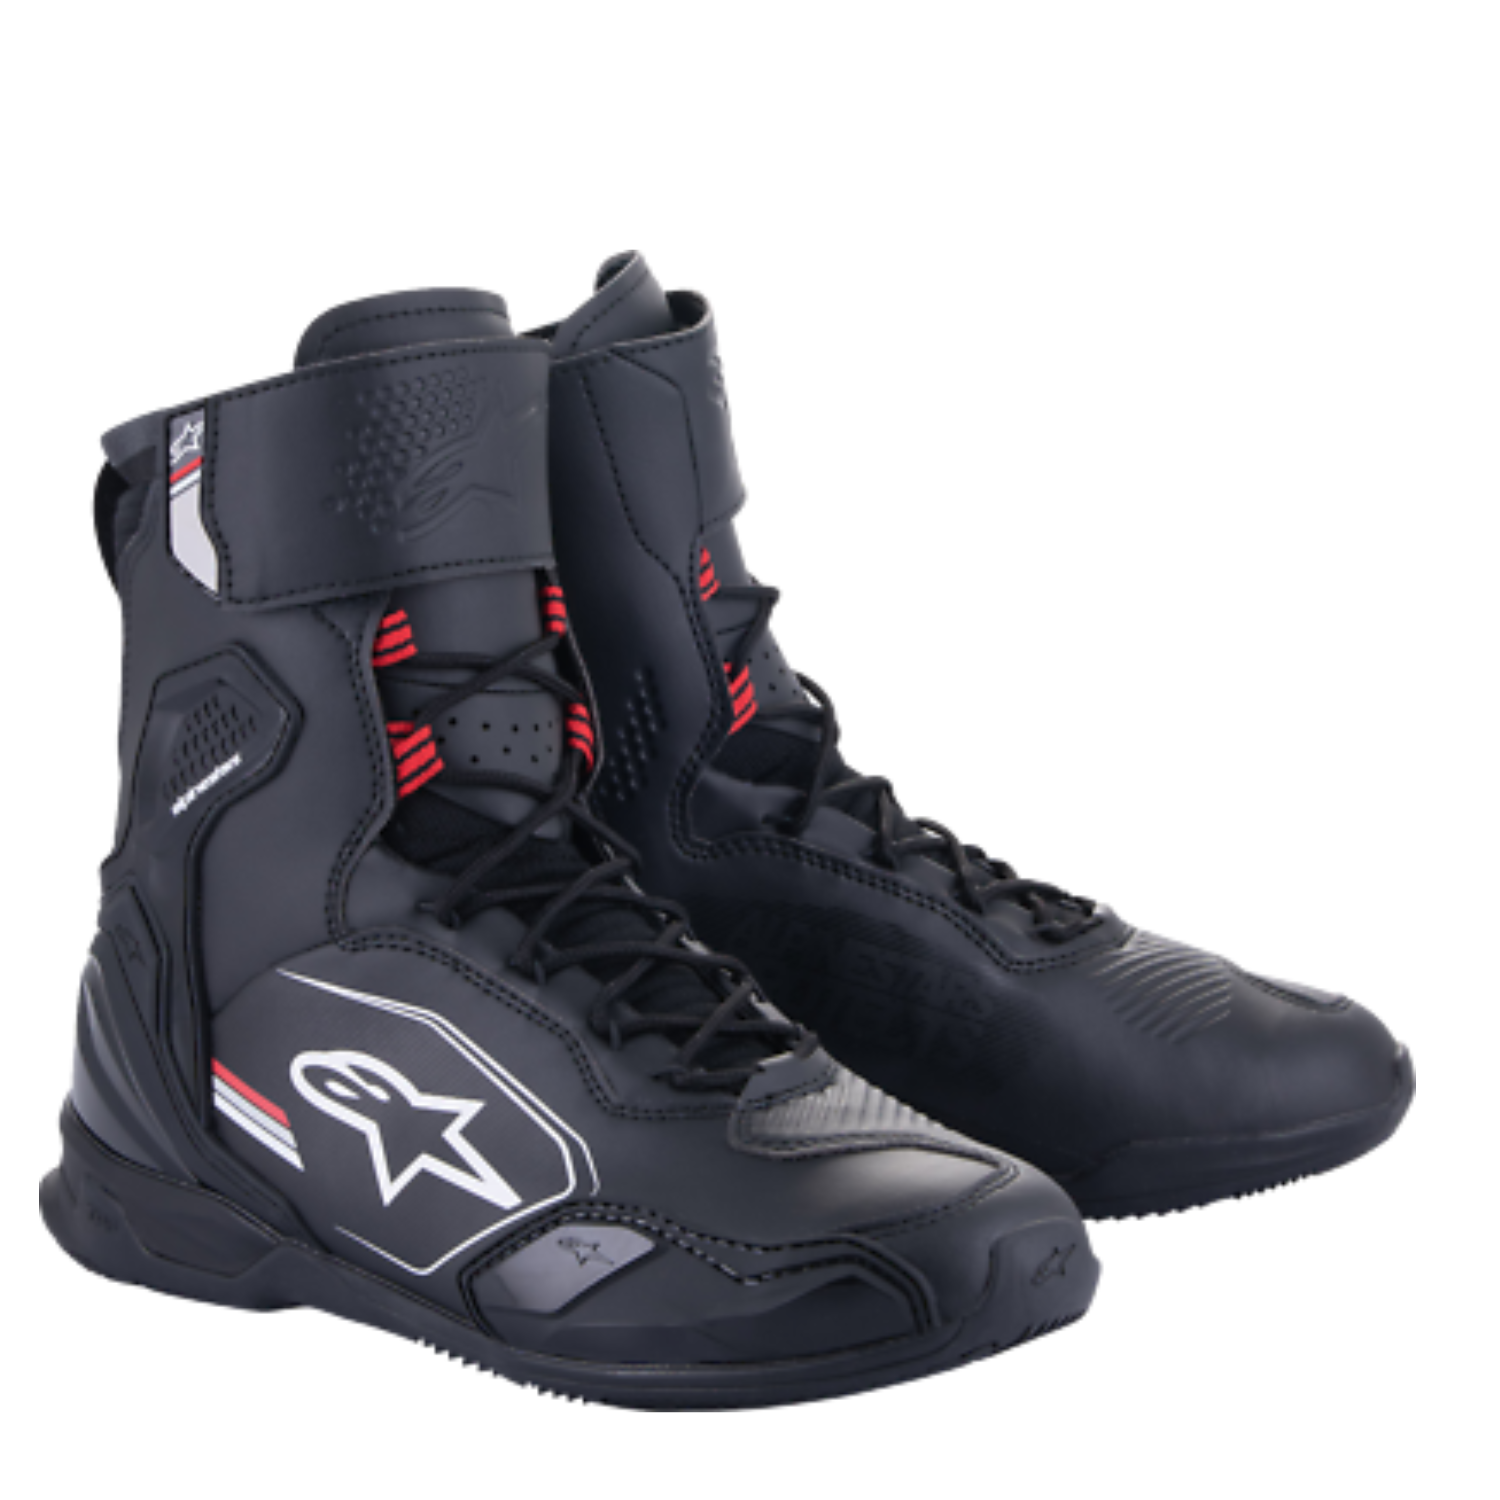 Image of EU Alpinestars Superfaster Shoes Black Gray Bright Red Taille US 7